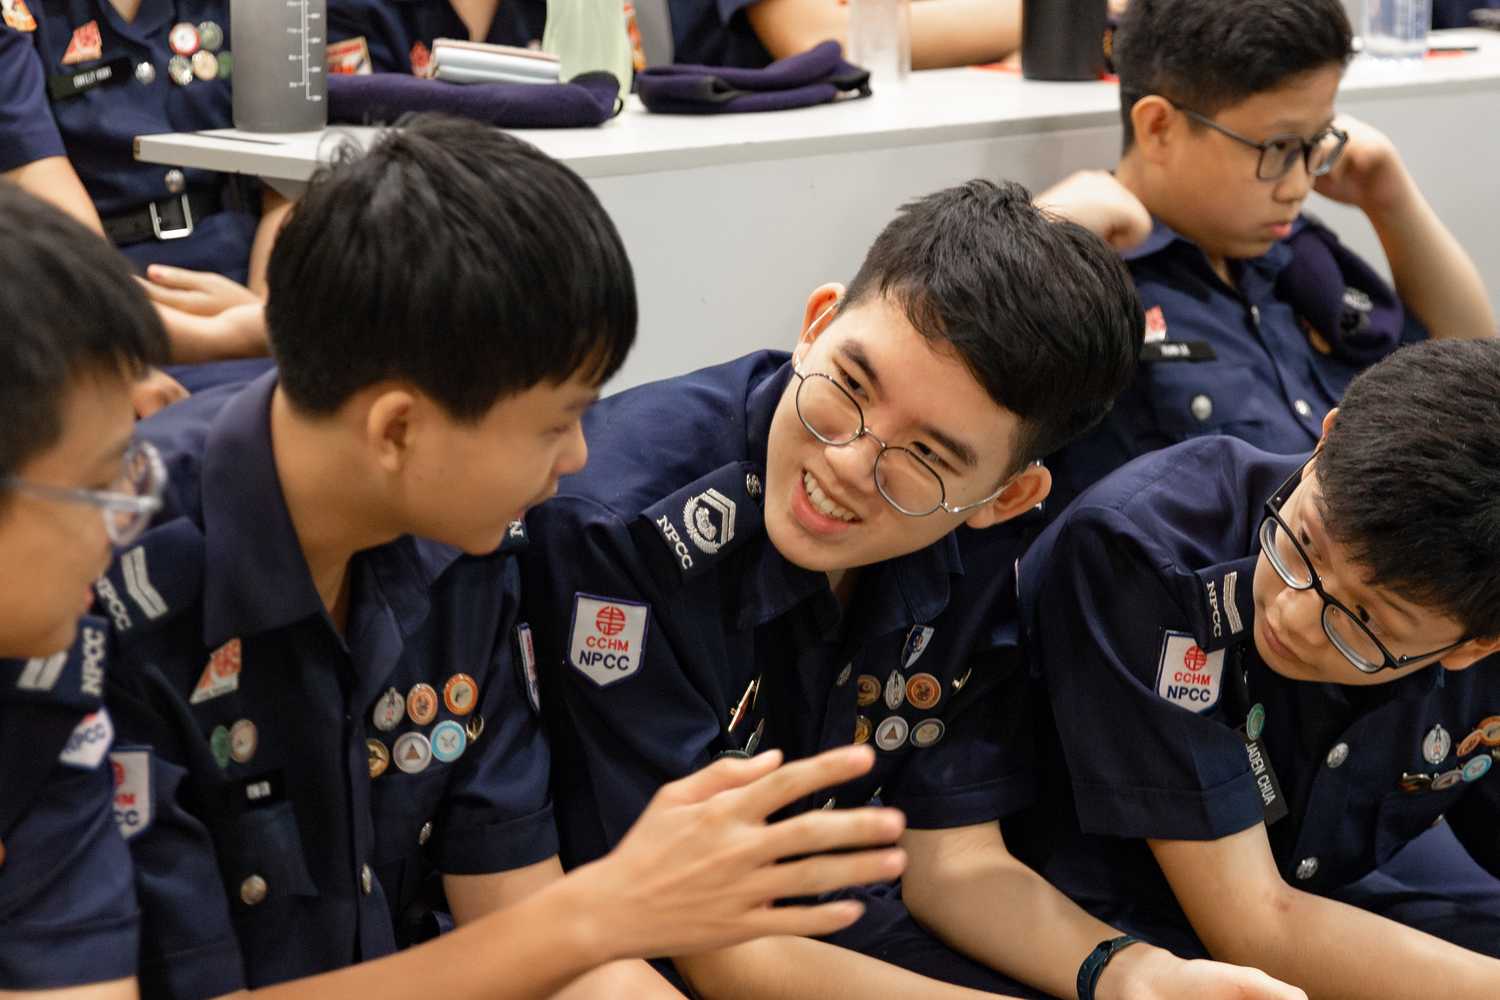 NPCC Cadets chatting with each other, one boy smiling at his friend, the latter telling him something. Both are engaged in conversation. 